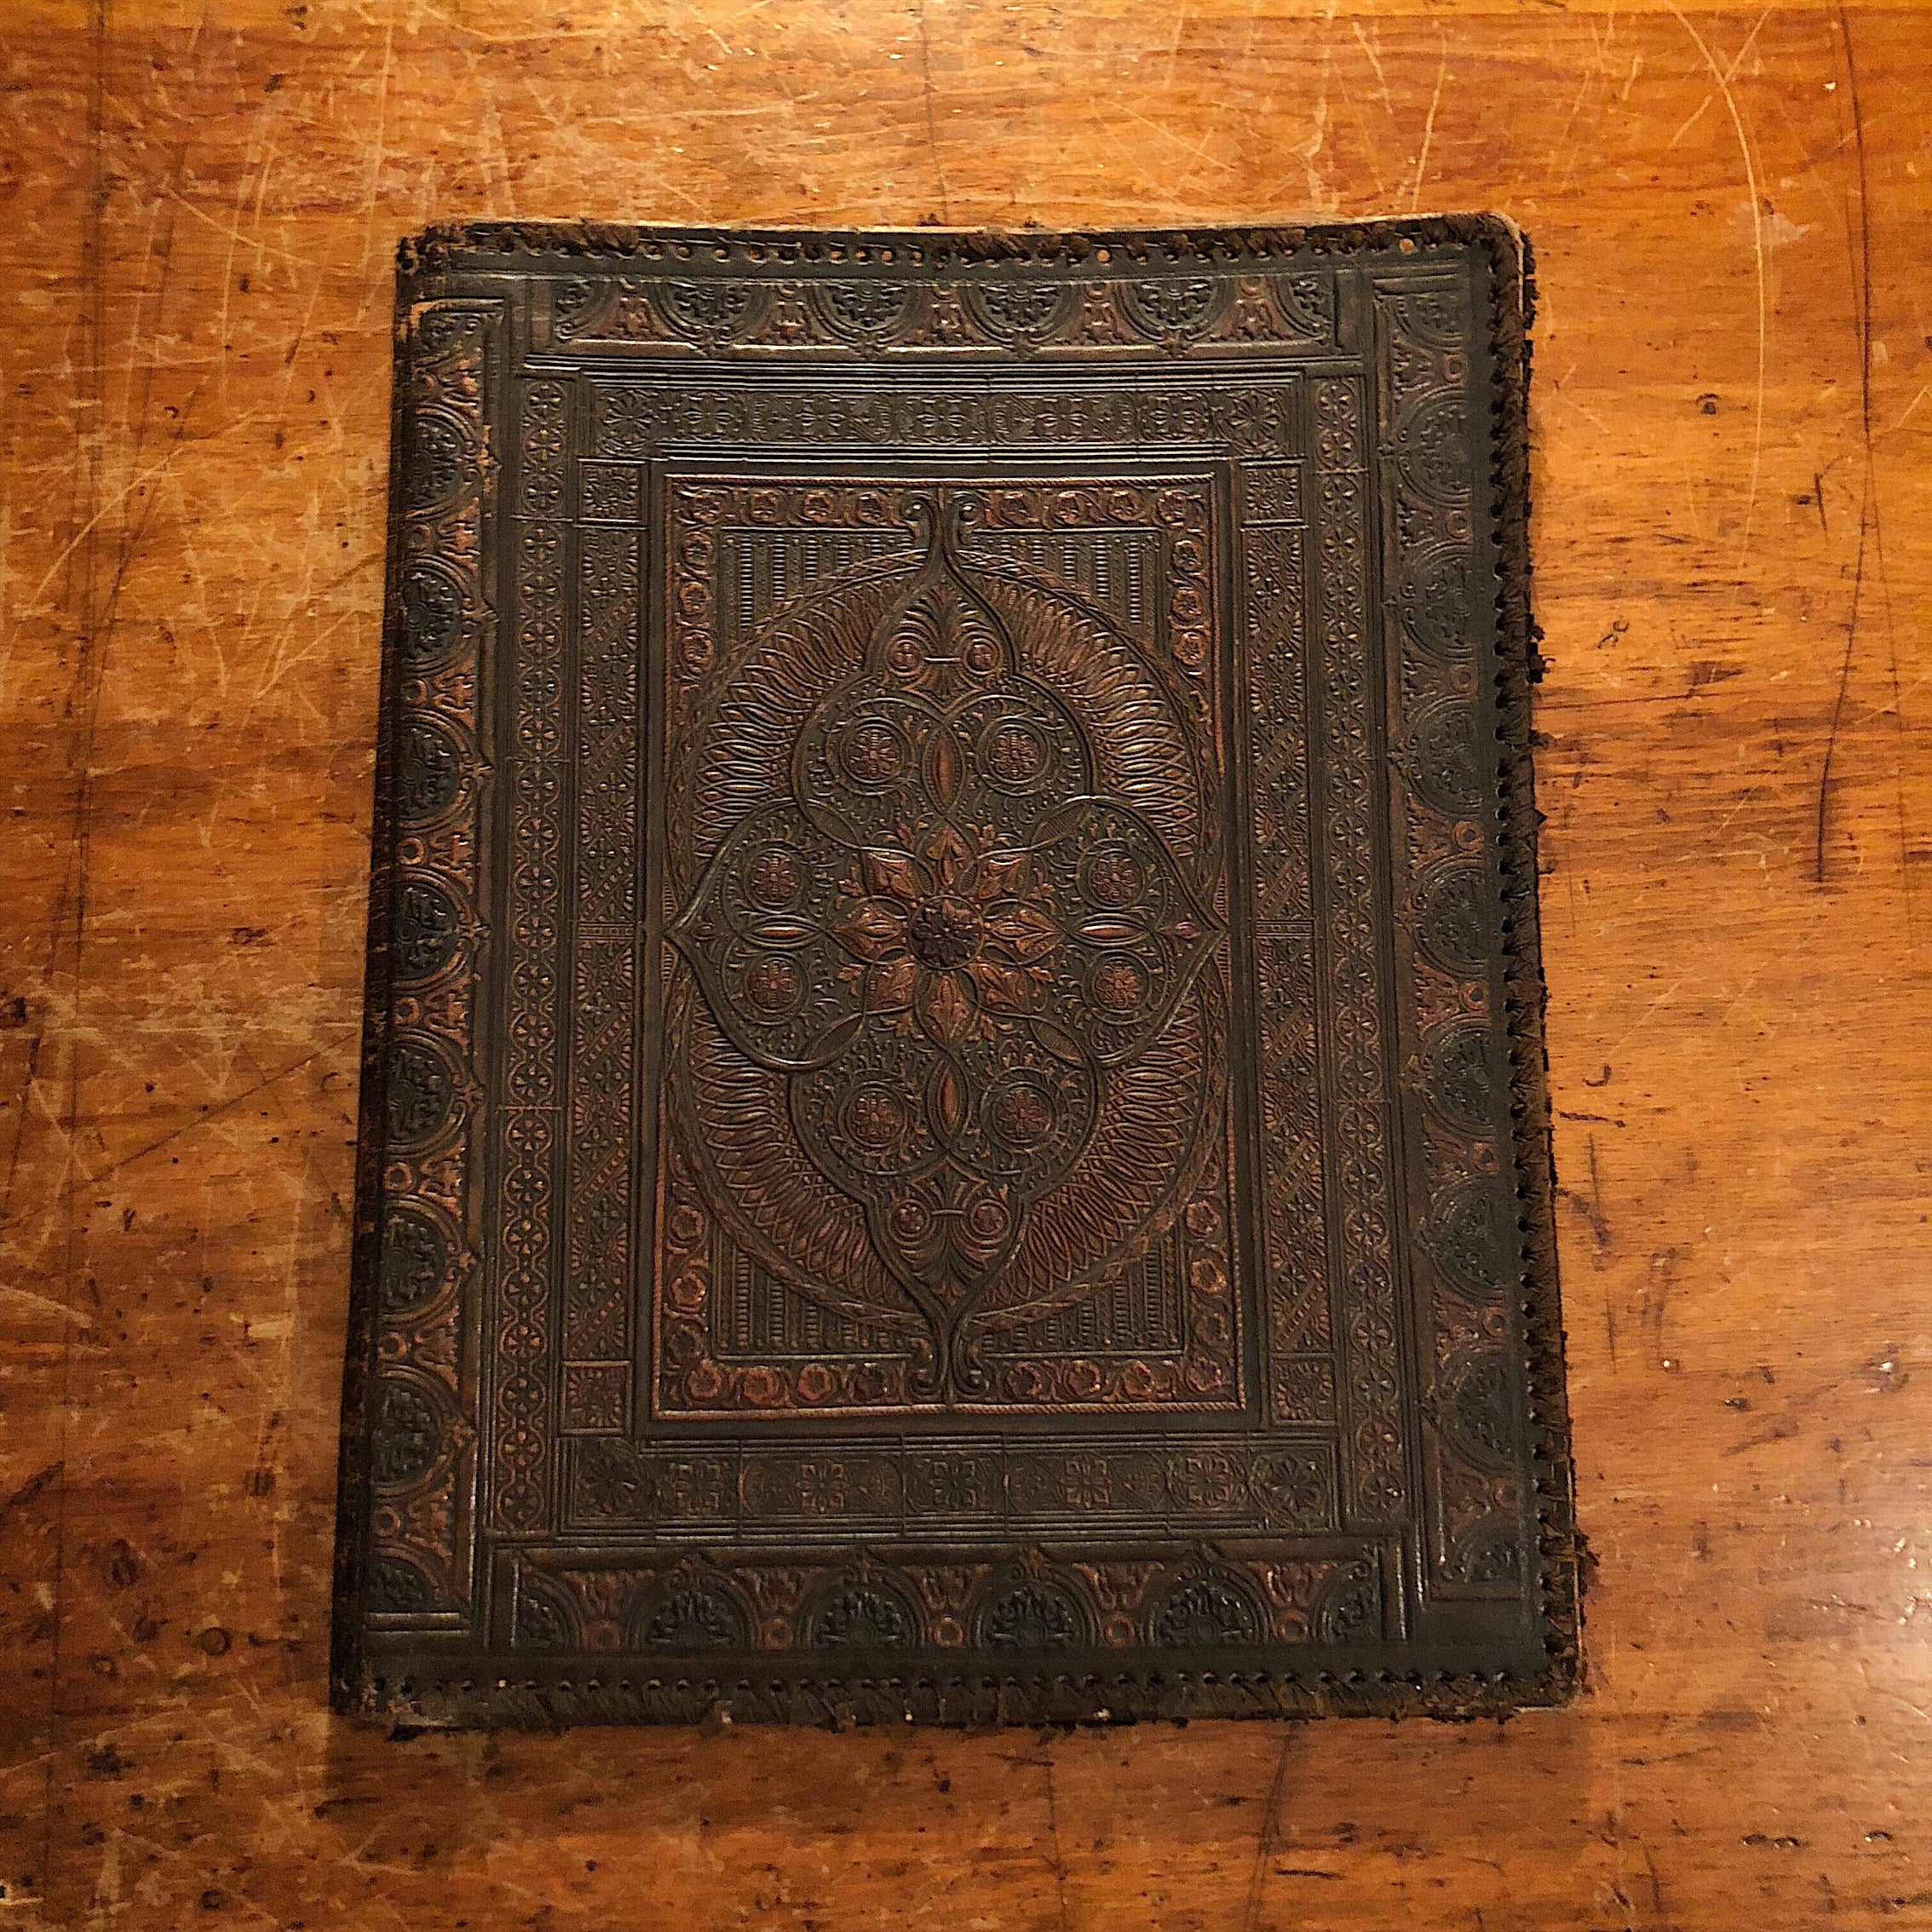 Antique Leather Portfolio Cover with Tooled Ornate Design - Continental School Manuscript Cover - Arts and Crafts - 19th Century